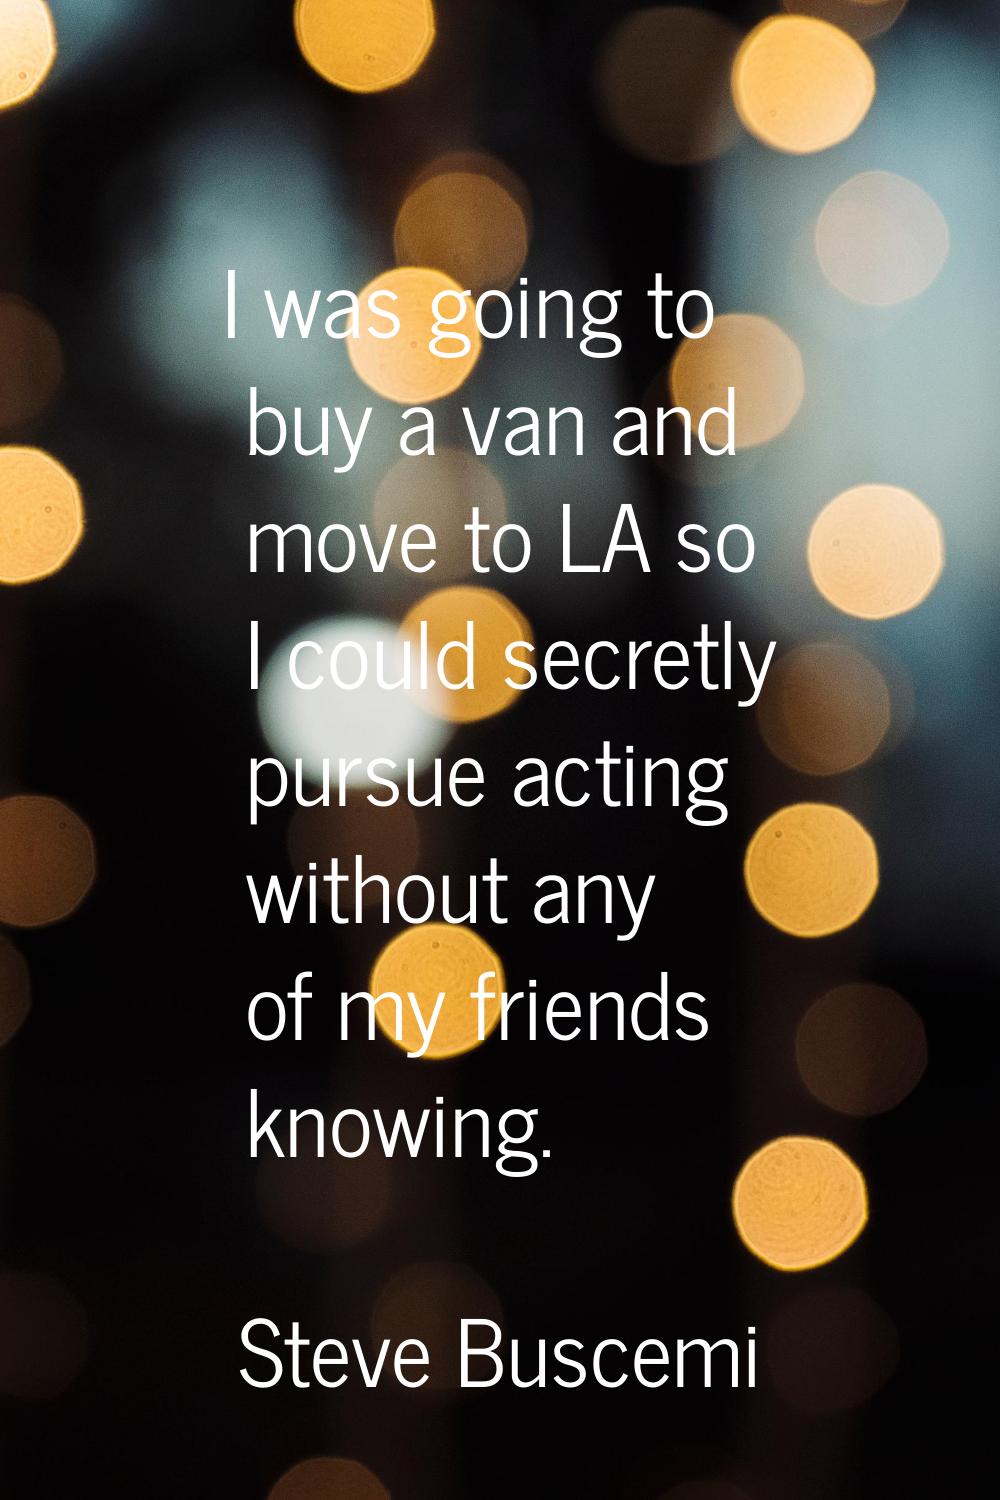 I was going to buy a van and move to LA so I could secretly pursue acting without any of my friends